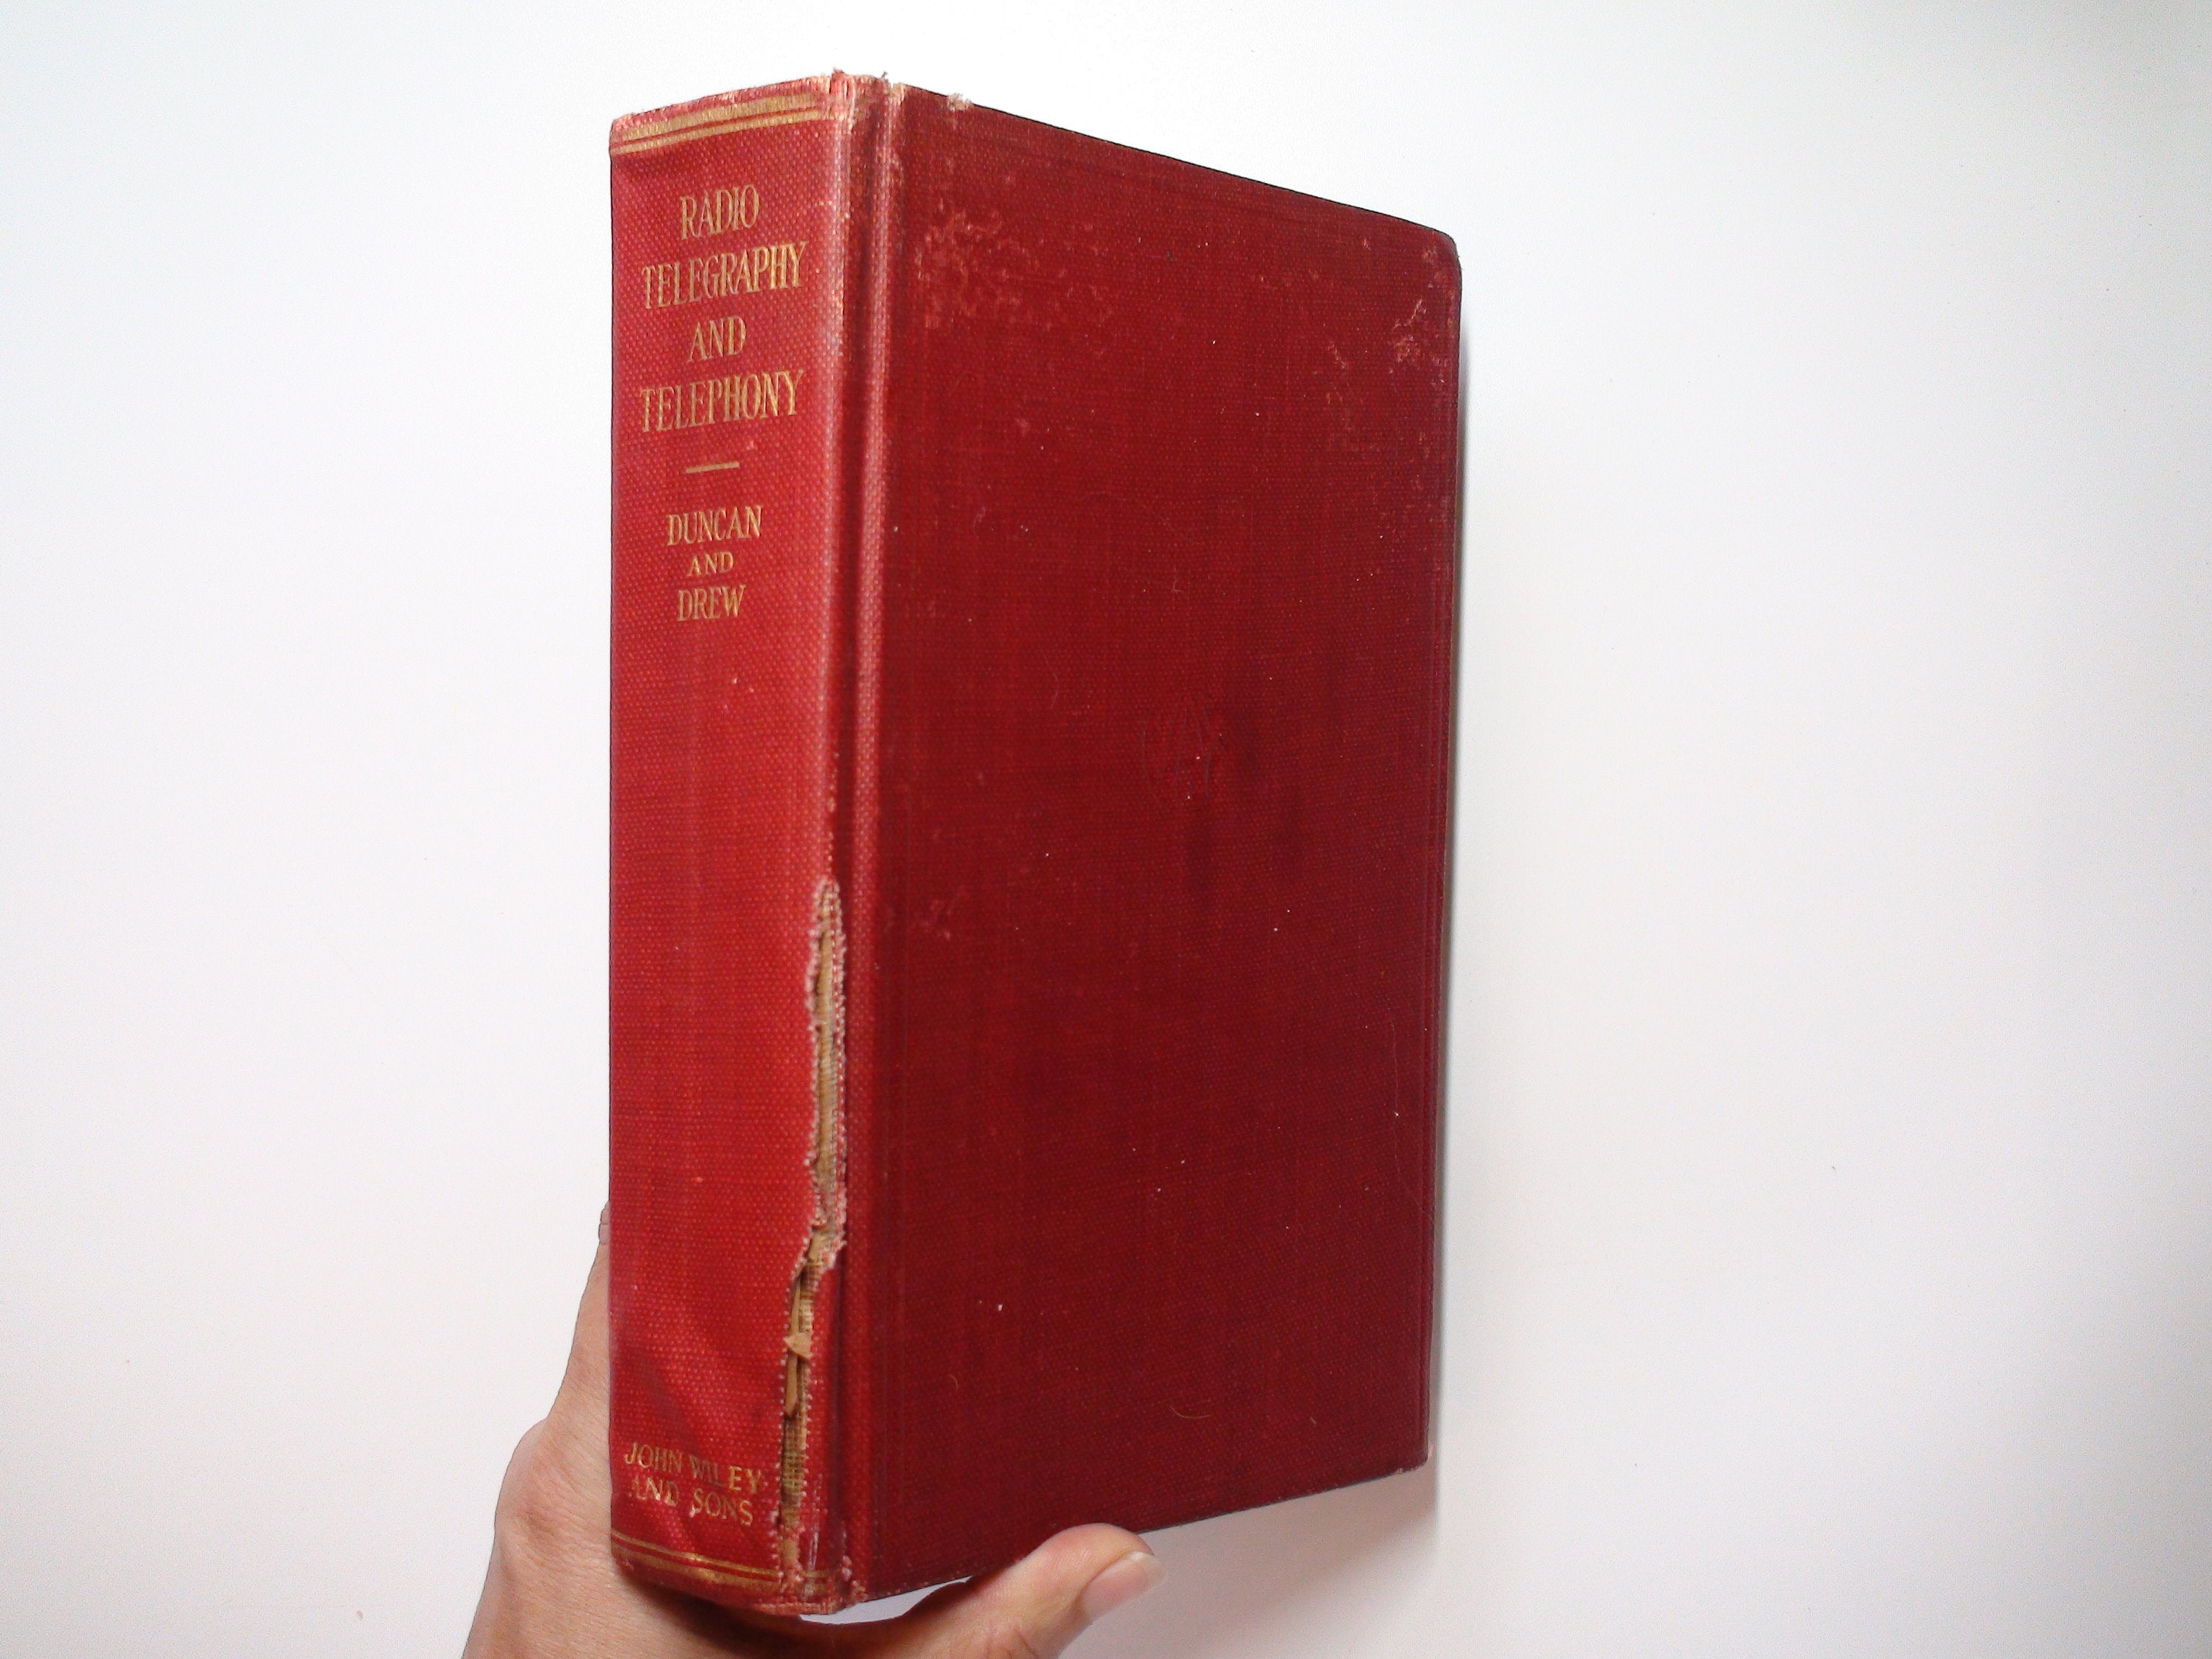 Radio Telegraphy and Telephony, by Rudolph L. Duncan, Illustrated, 1st Ed, 1929